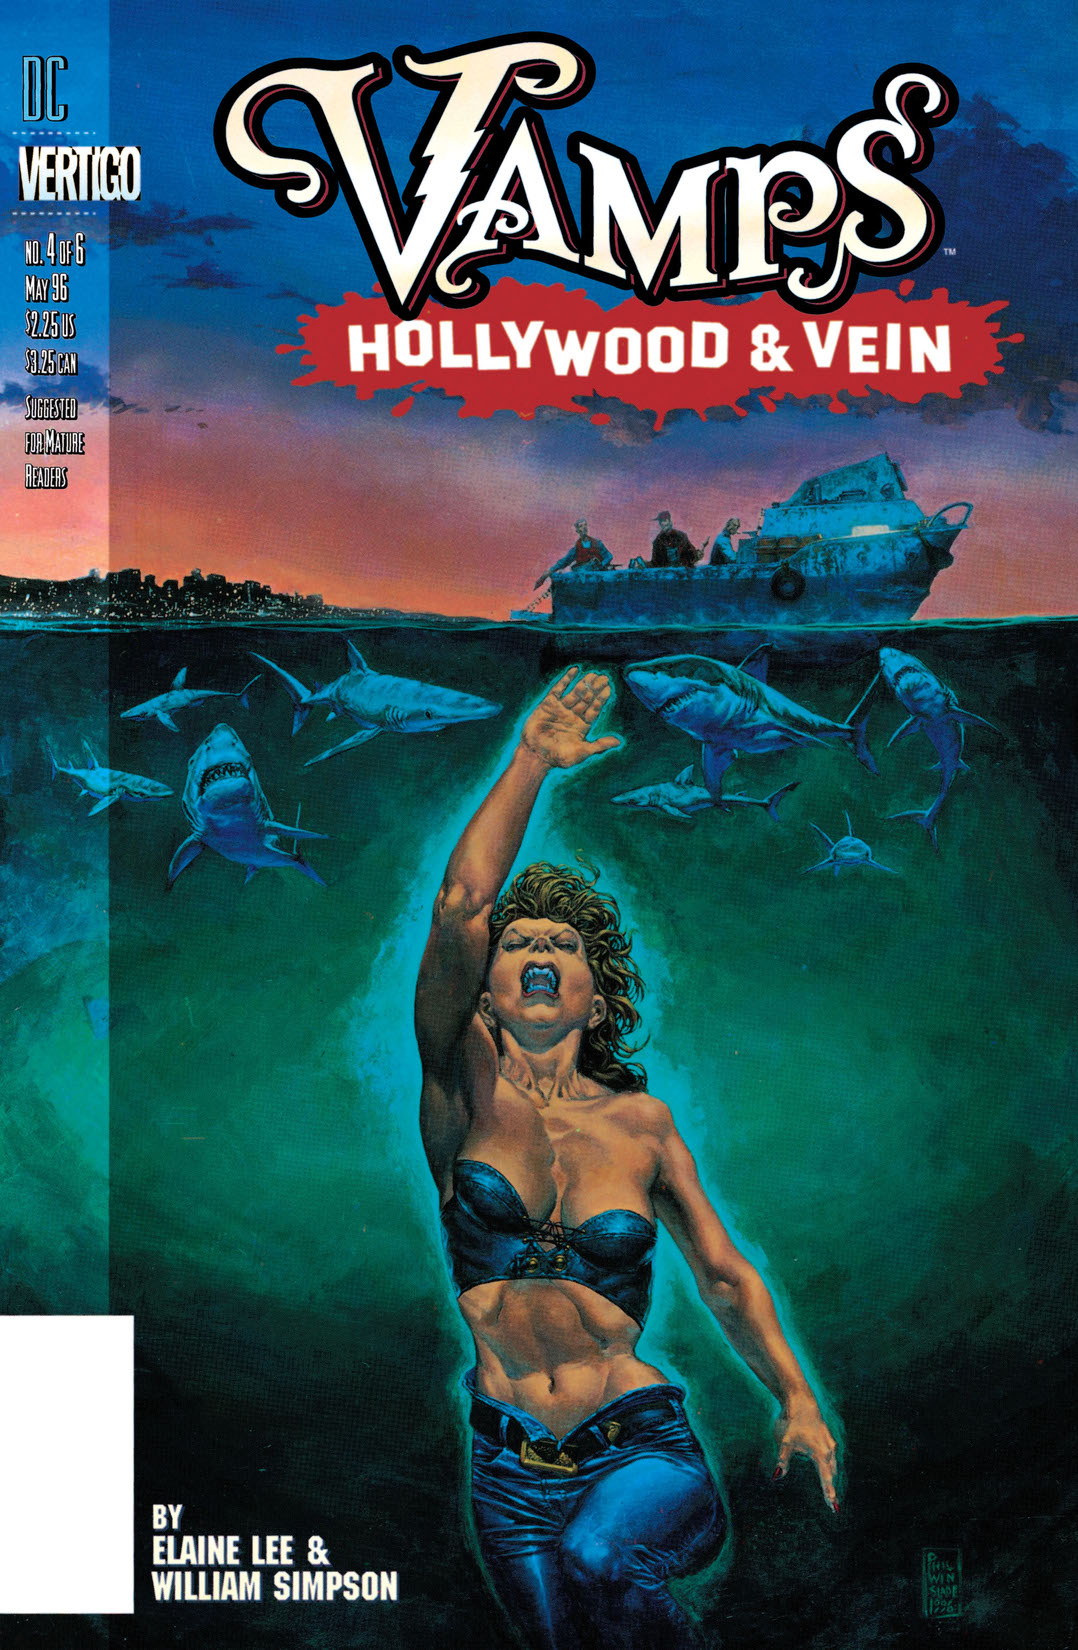 Vamps: Hollywood and Vein #4 preview images